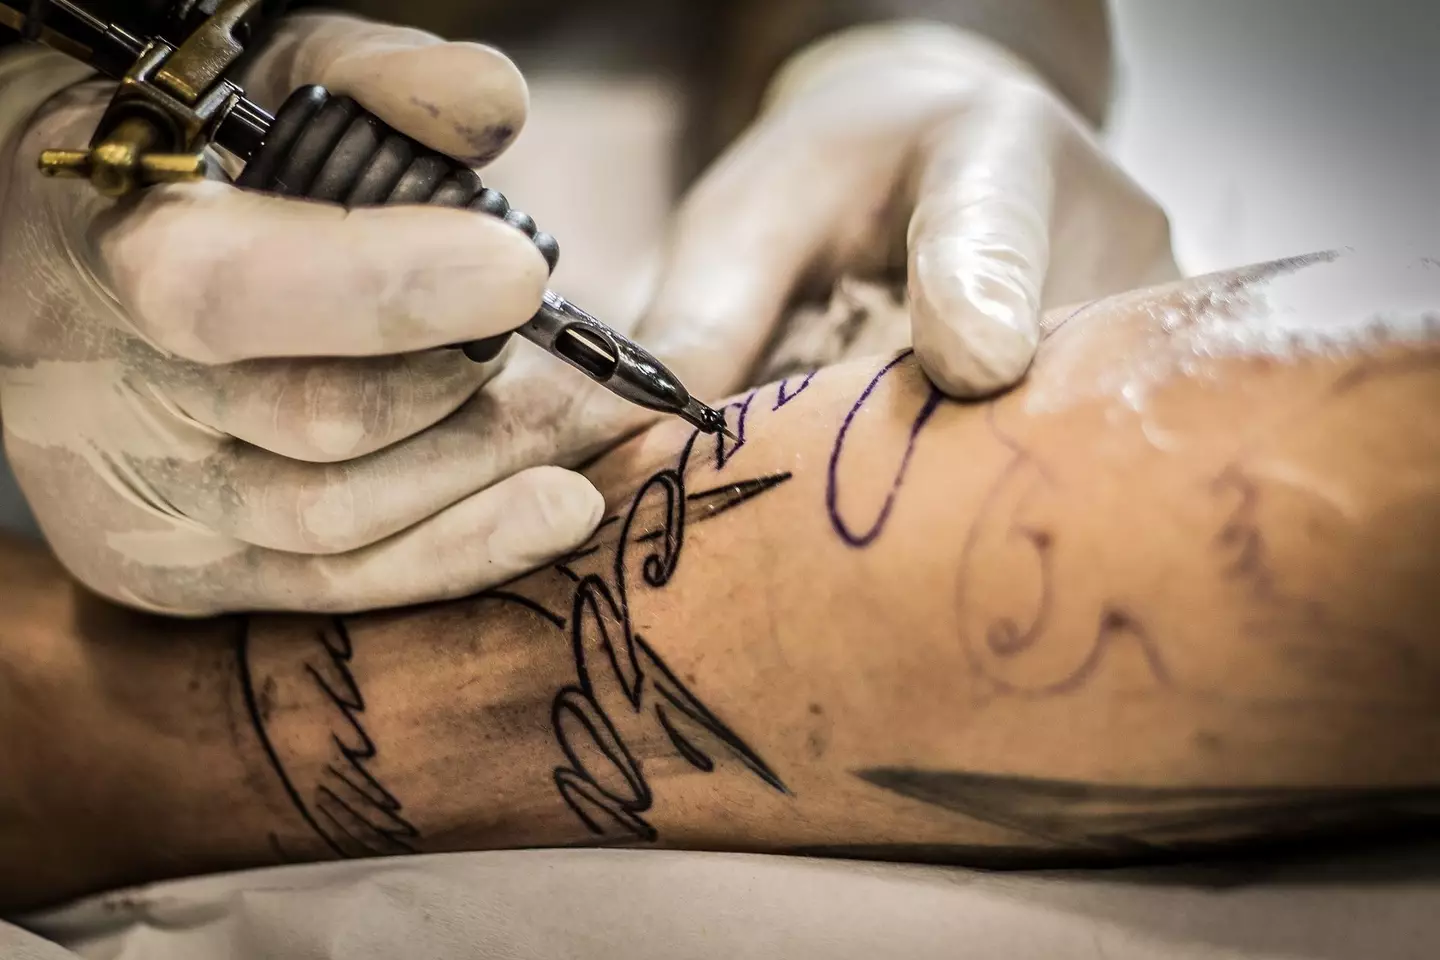 Researchers claim little is known about the ingredients in tattoo inks.